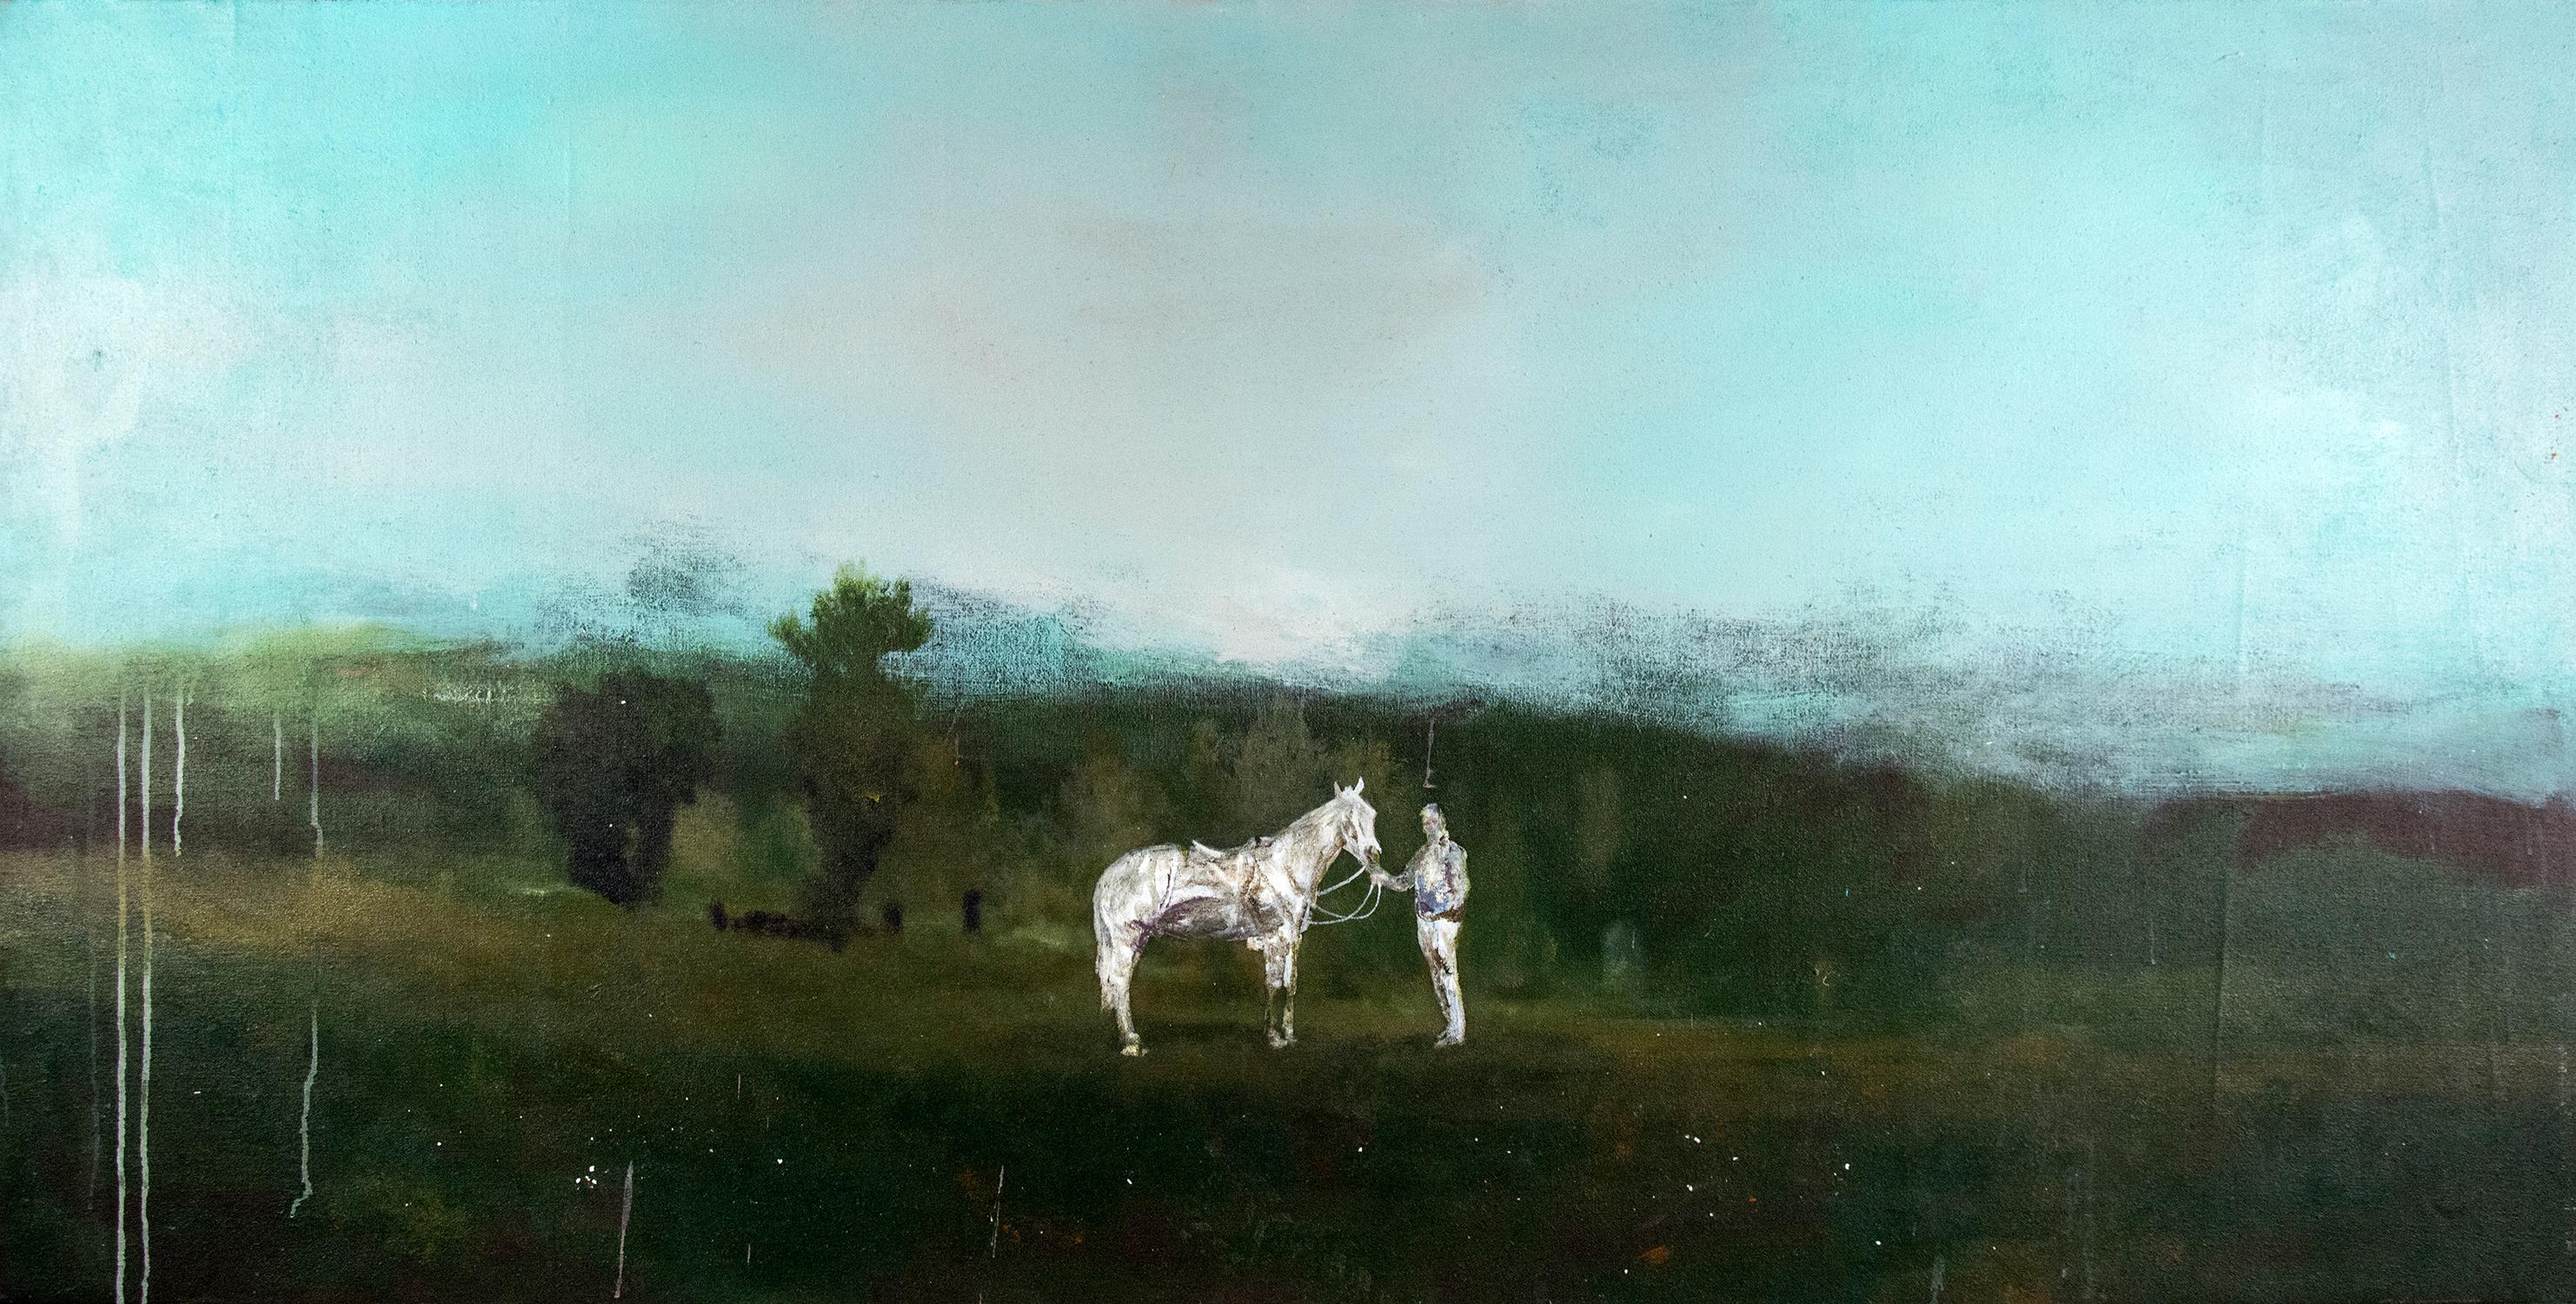 Peter Hoffer Figurative Painting - Horse and Rider - large, green, blue, landscape, figurative, mixed media on jute